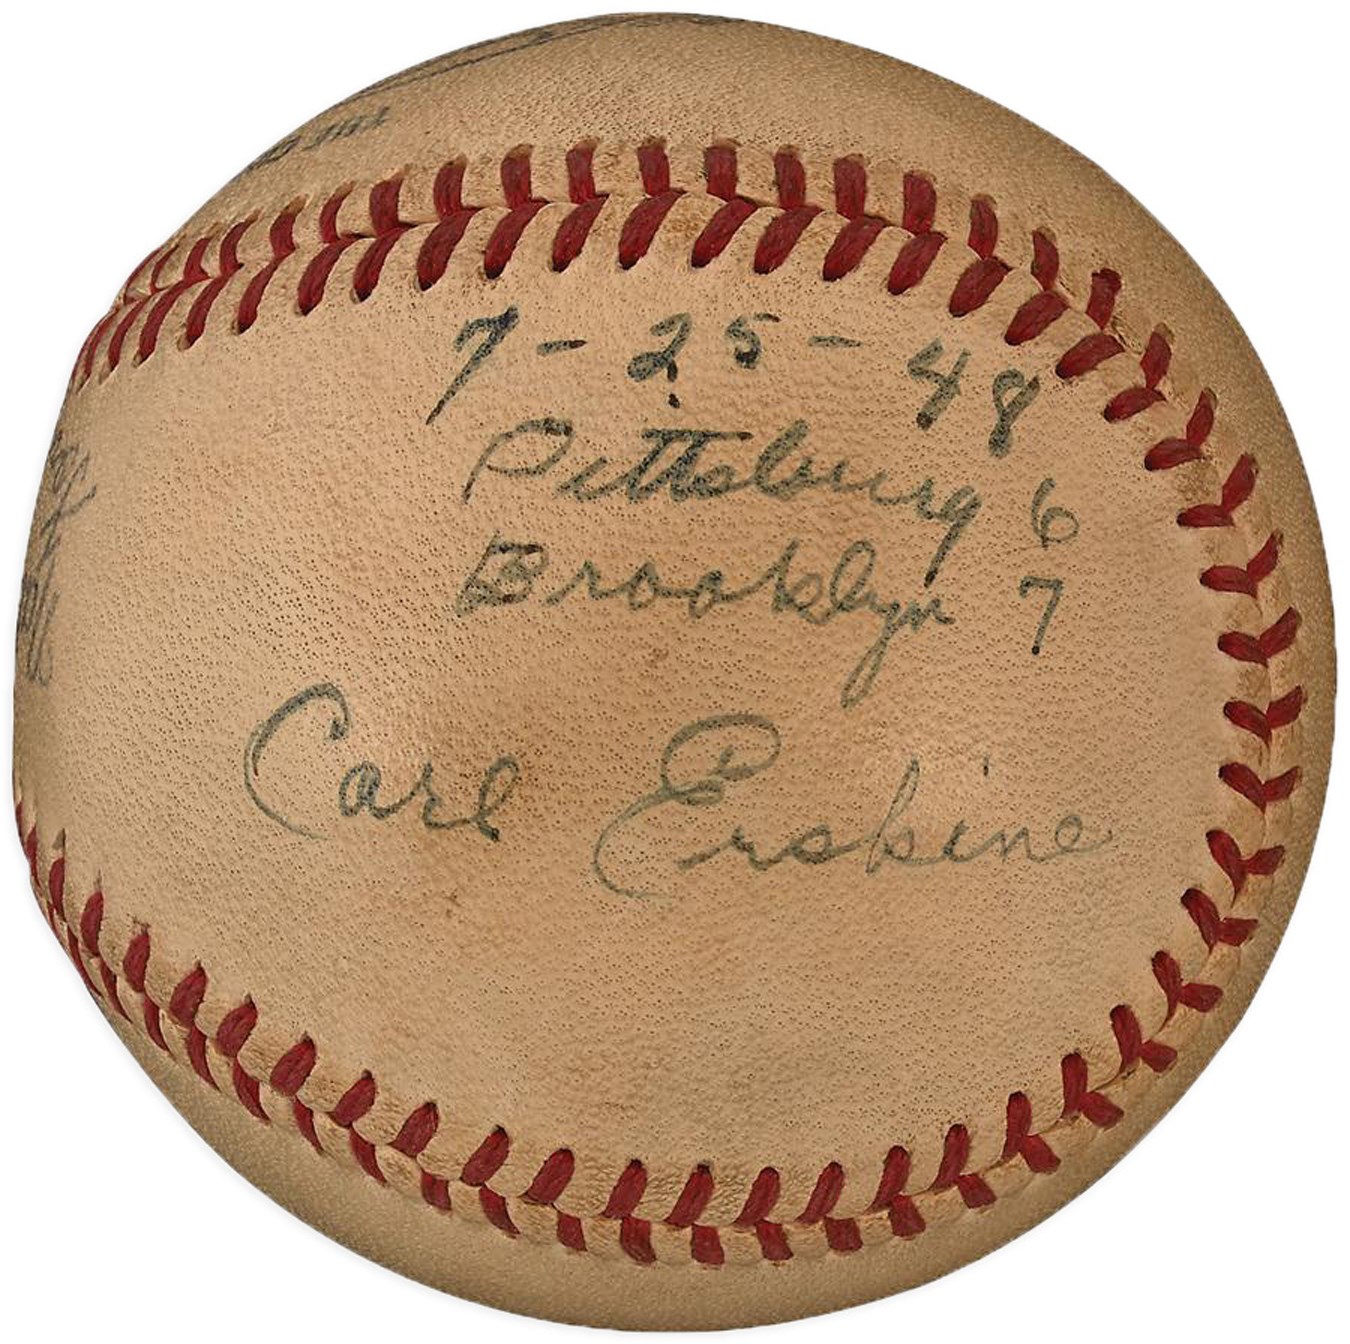 Jackie Robinson & Brooklyn Dodgers - 1948 Carl Erskine Last Out Baseball from His First Career Win (PSA)